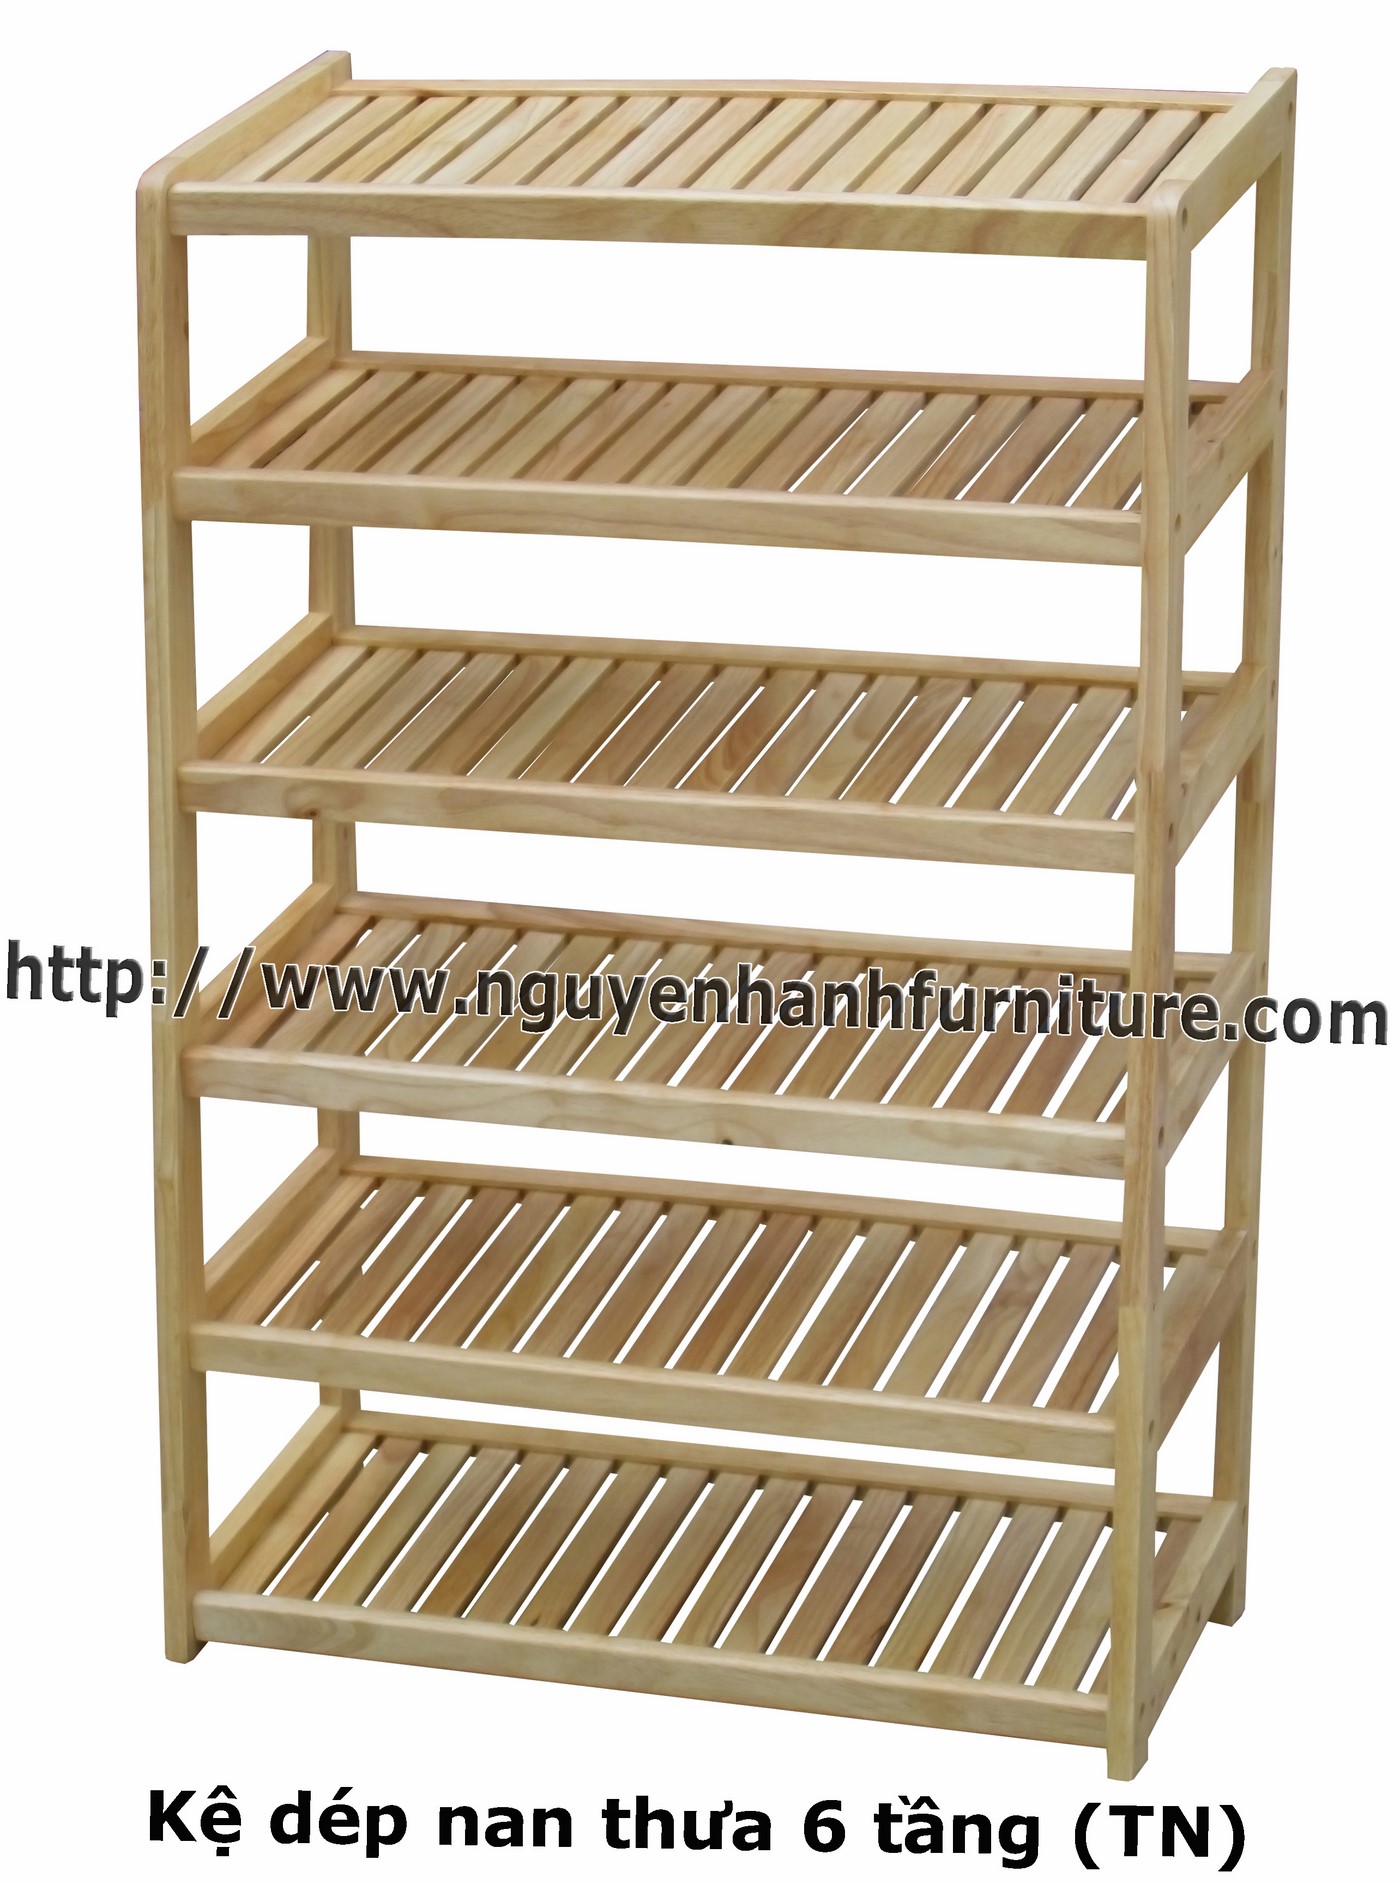 Name product: Shoeshelf 6 Floors with sparse blades (Natural) - Dimensions: 62 x 30 x 98 (H) - Description: Wood natural rubber